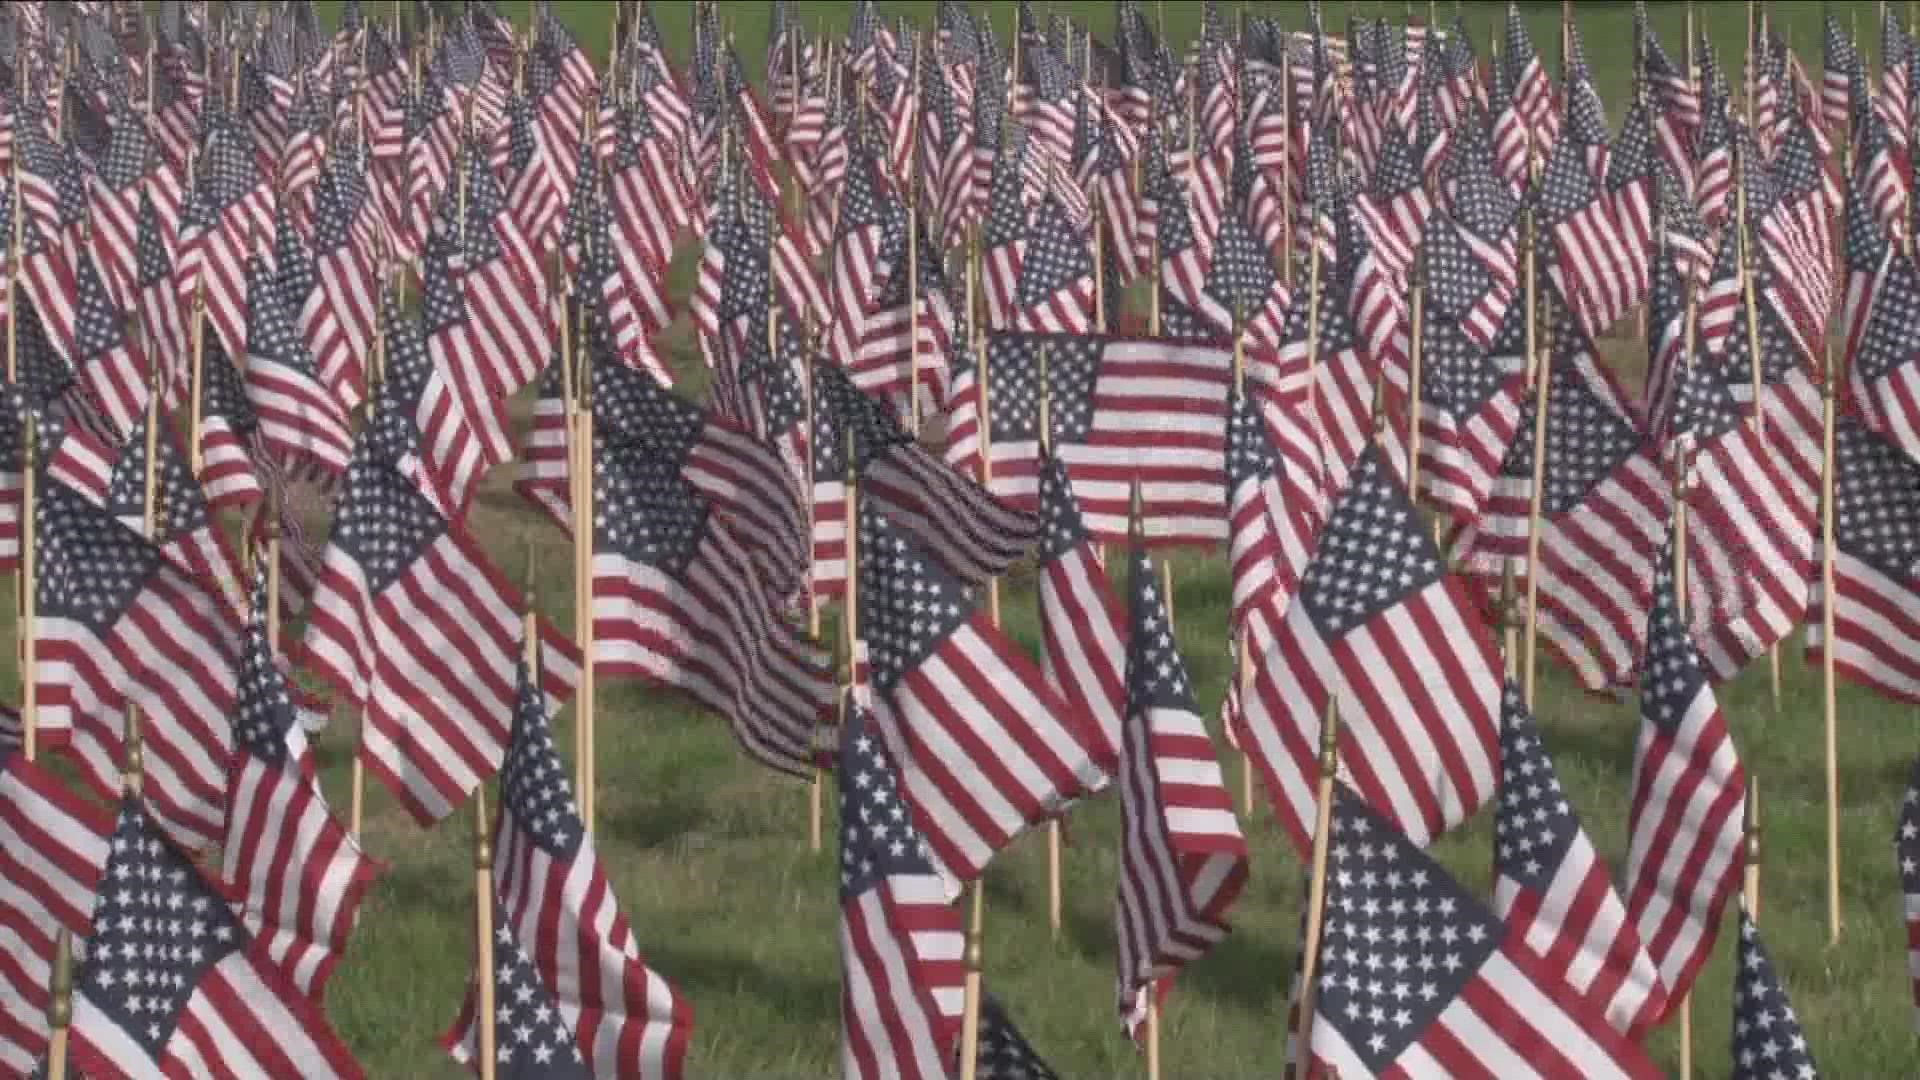 Flags were placed on the ground for a large display in Batavia outside the VA medical center Saturday in remembrance of those who lost their lives from 9/11.